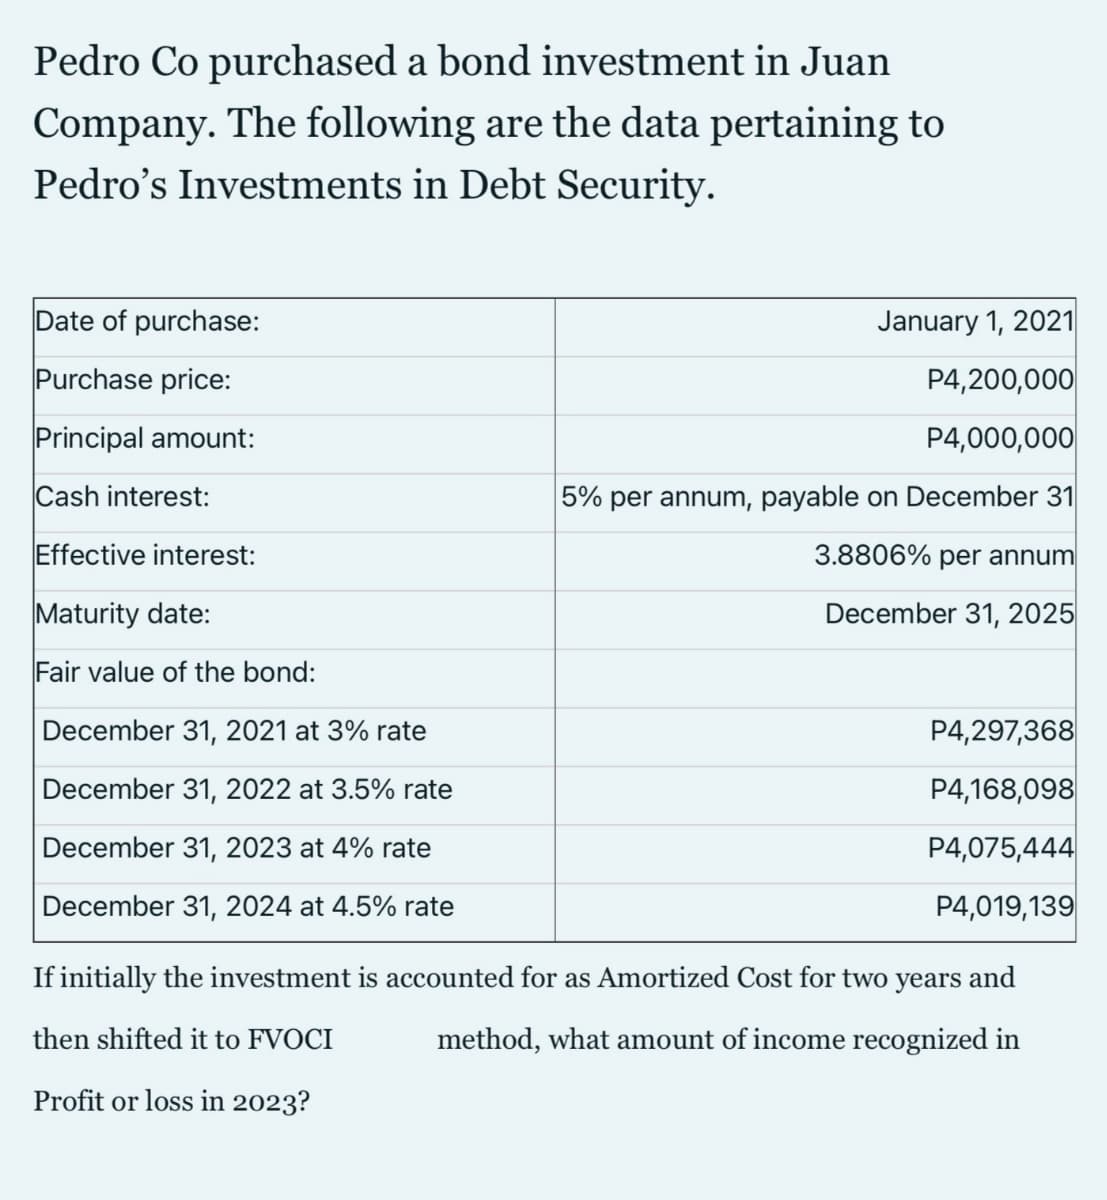 Pedro Co purchased a bond investment in Juan
Company. The following are the data pertaining to
Pedro's Investments in Debt Security.
Date of purchase:
January 1, 2021
Purchase price:
P4,200,000
Principal amount:
P4,000,000
Cash interest:
5% per annum, payable on December 31
Effective interest:
3.8806% per annum
Maturity date:
December 31, 2025
Fair value of the bond:
December 31, 2021 at 3% rate
P4,297,368
December 31, 2022 at 3.5% rate
P4,168,098
December 31, 2023 at 4% rate
P4,075,444
December 31, 2024 at 4.5% rate
P4,019,139
If initially the investment is accounted for as Amortized Cost for two years and
then shifted it to FVOCI
method, what amount of income recognized in
Profit or loss in 2023?
